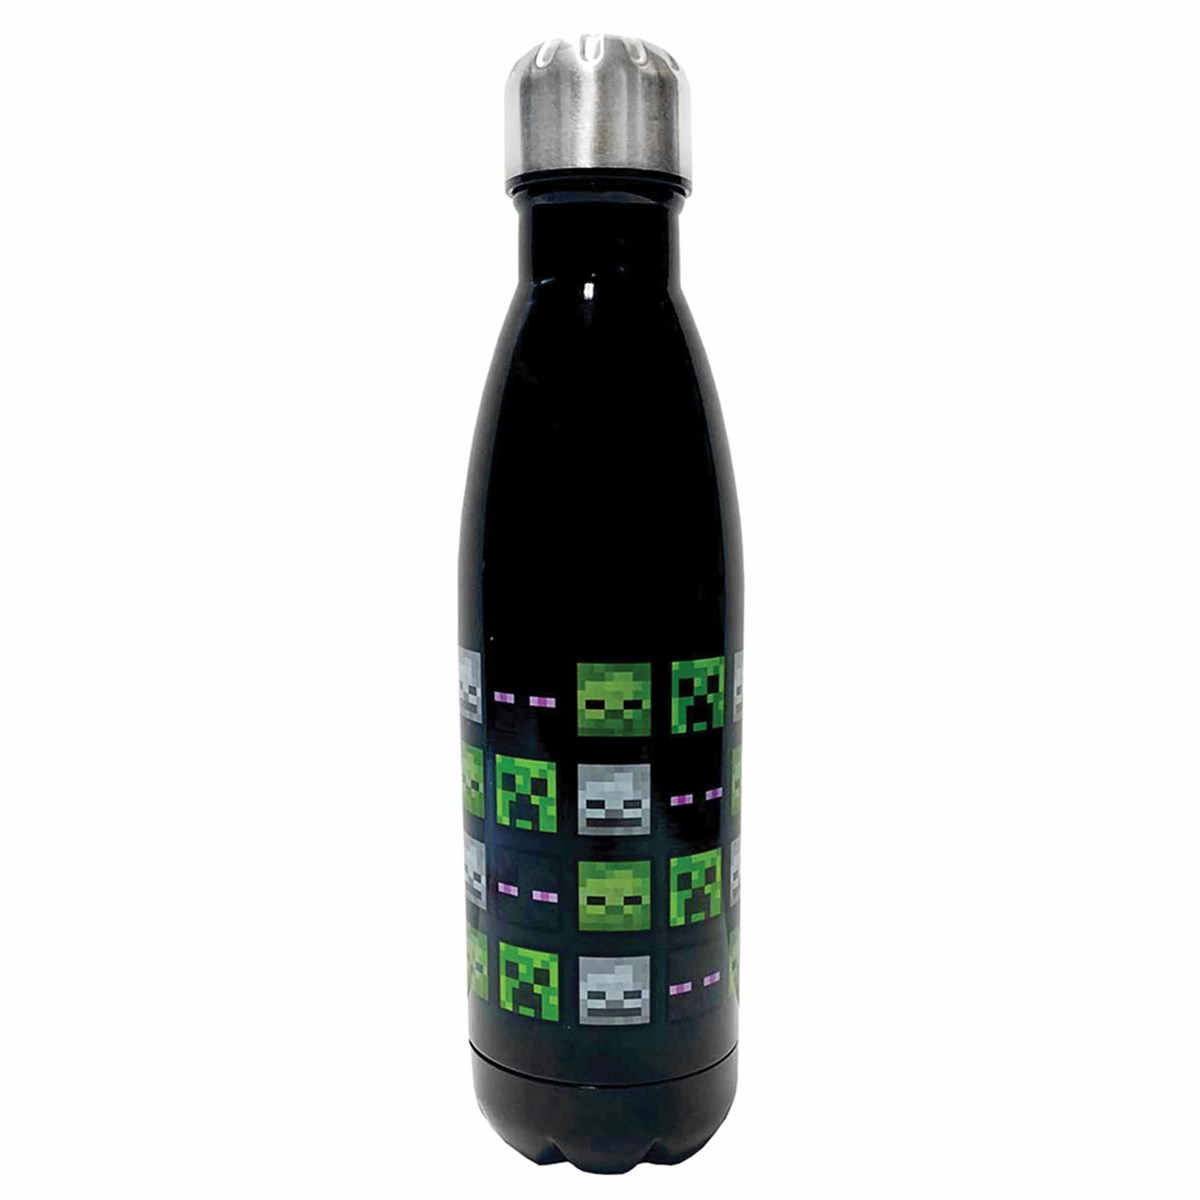 https://www.calendarclub.co.uk/Images/Product/Default/xlarge/305805-minecraft-mob-heads-stainless-steel-water-bottle-main.jpg